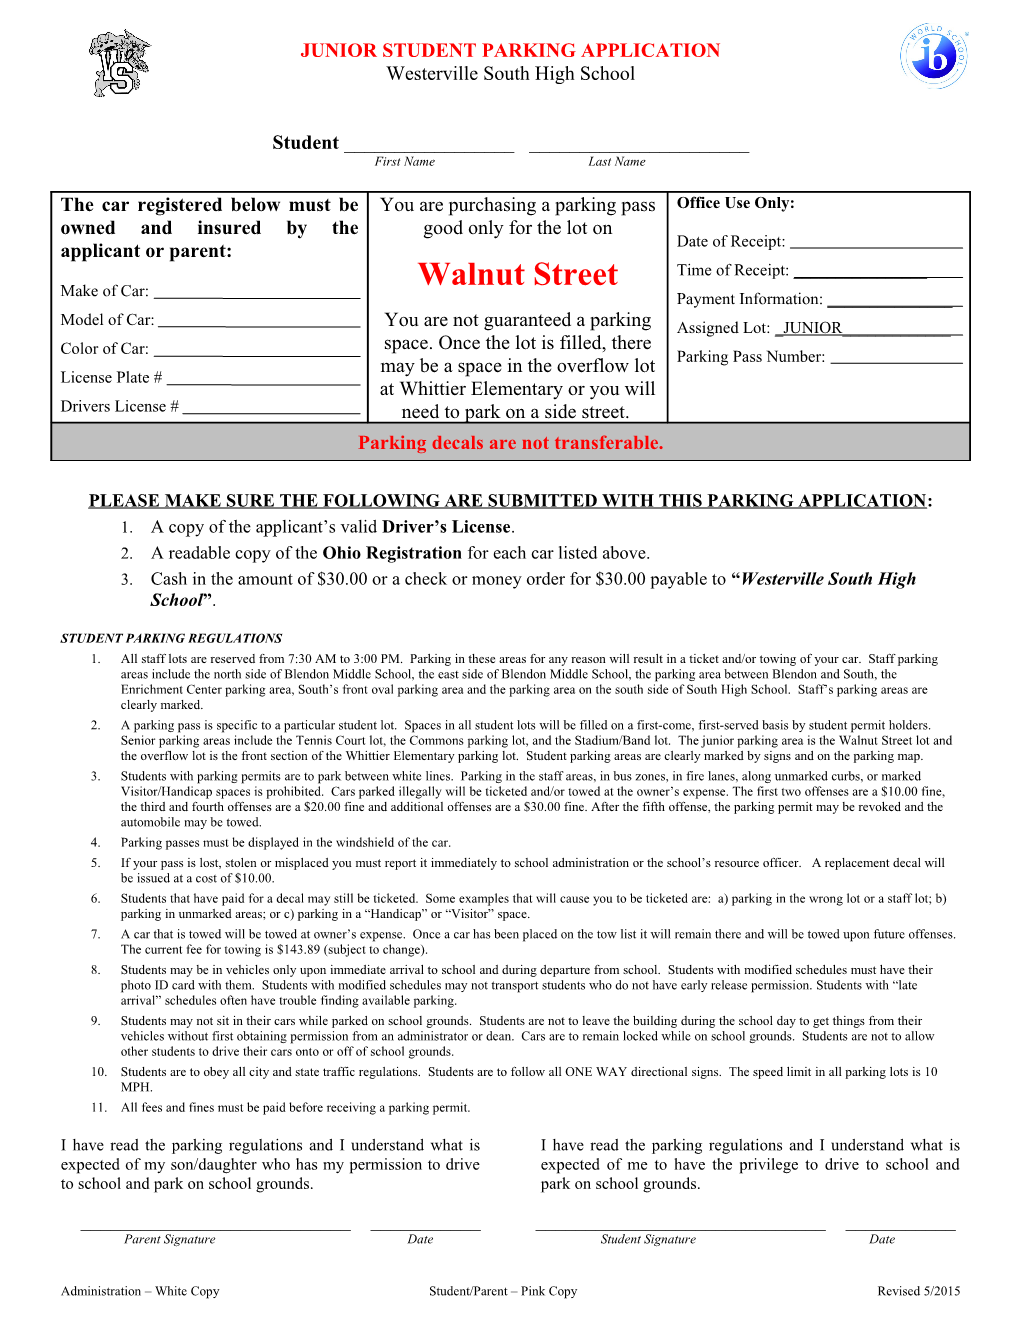 Student Parking Application